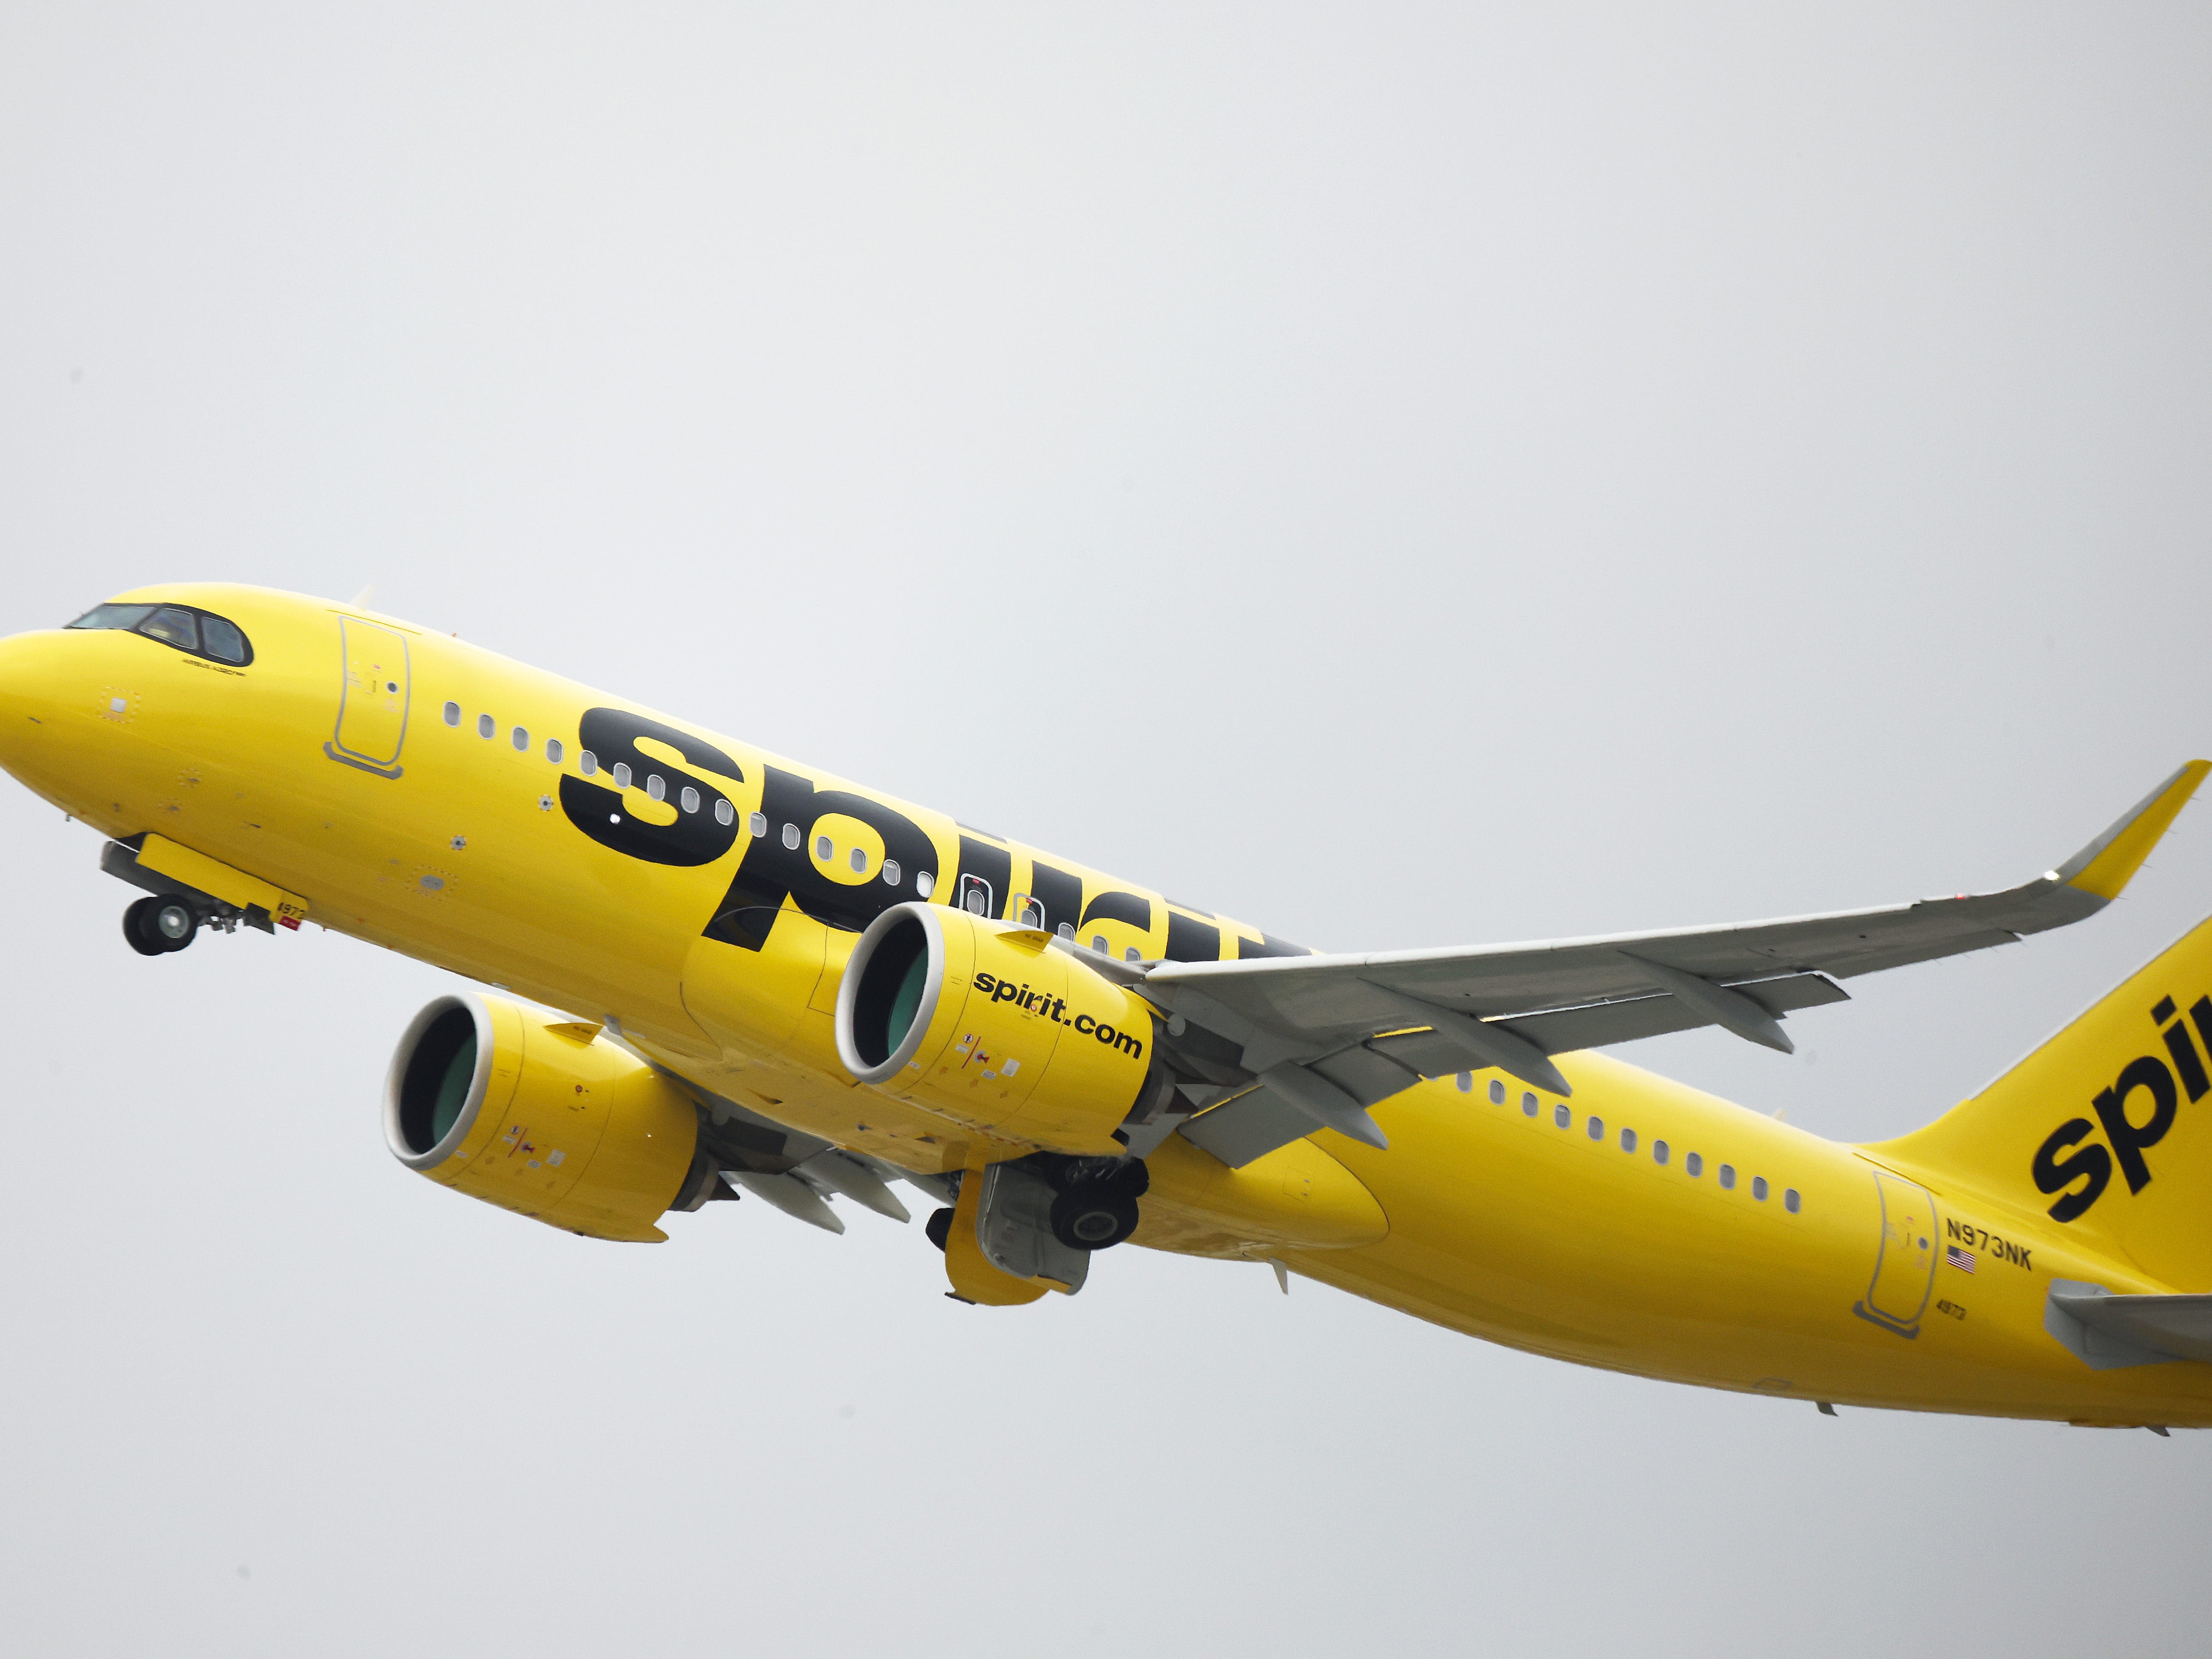 Spirit Airlines passengers say they were told to prepare for an emergency water landing in a chaotic flight to Florida